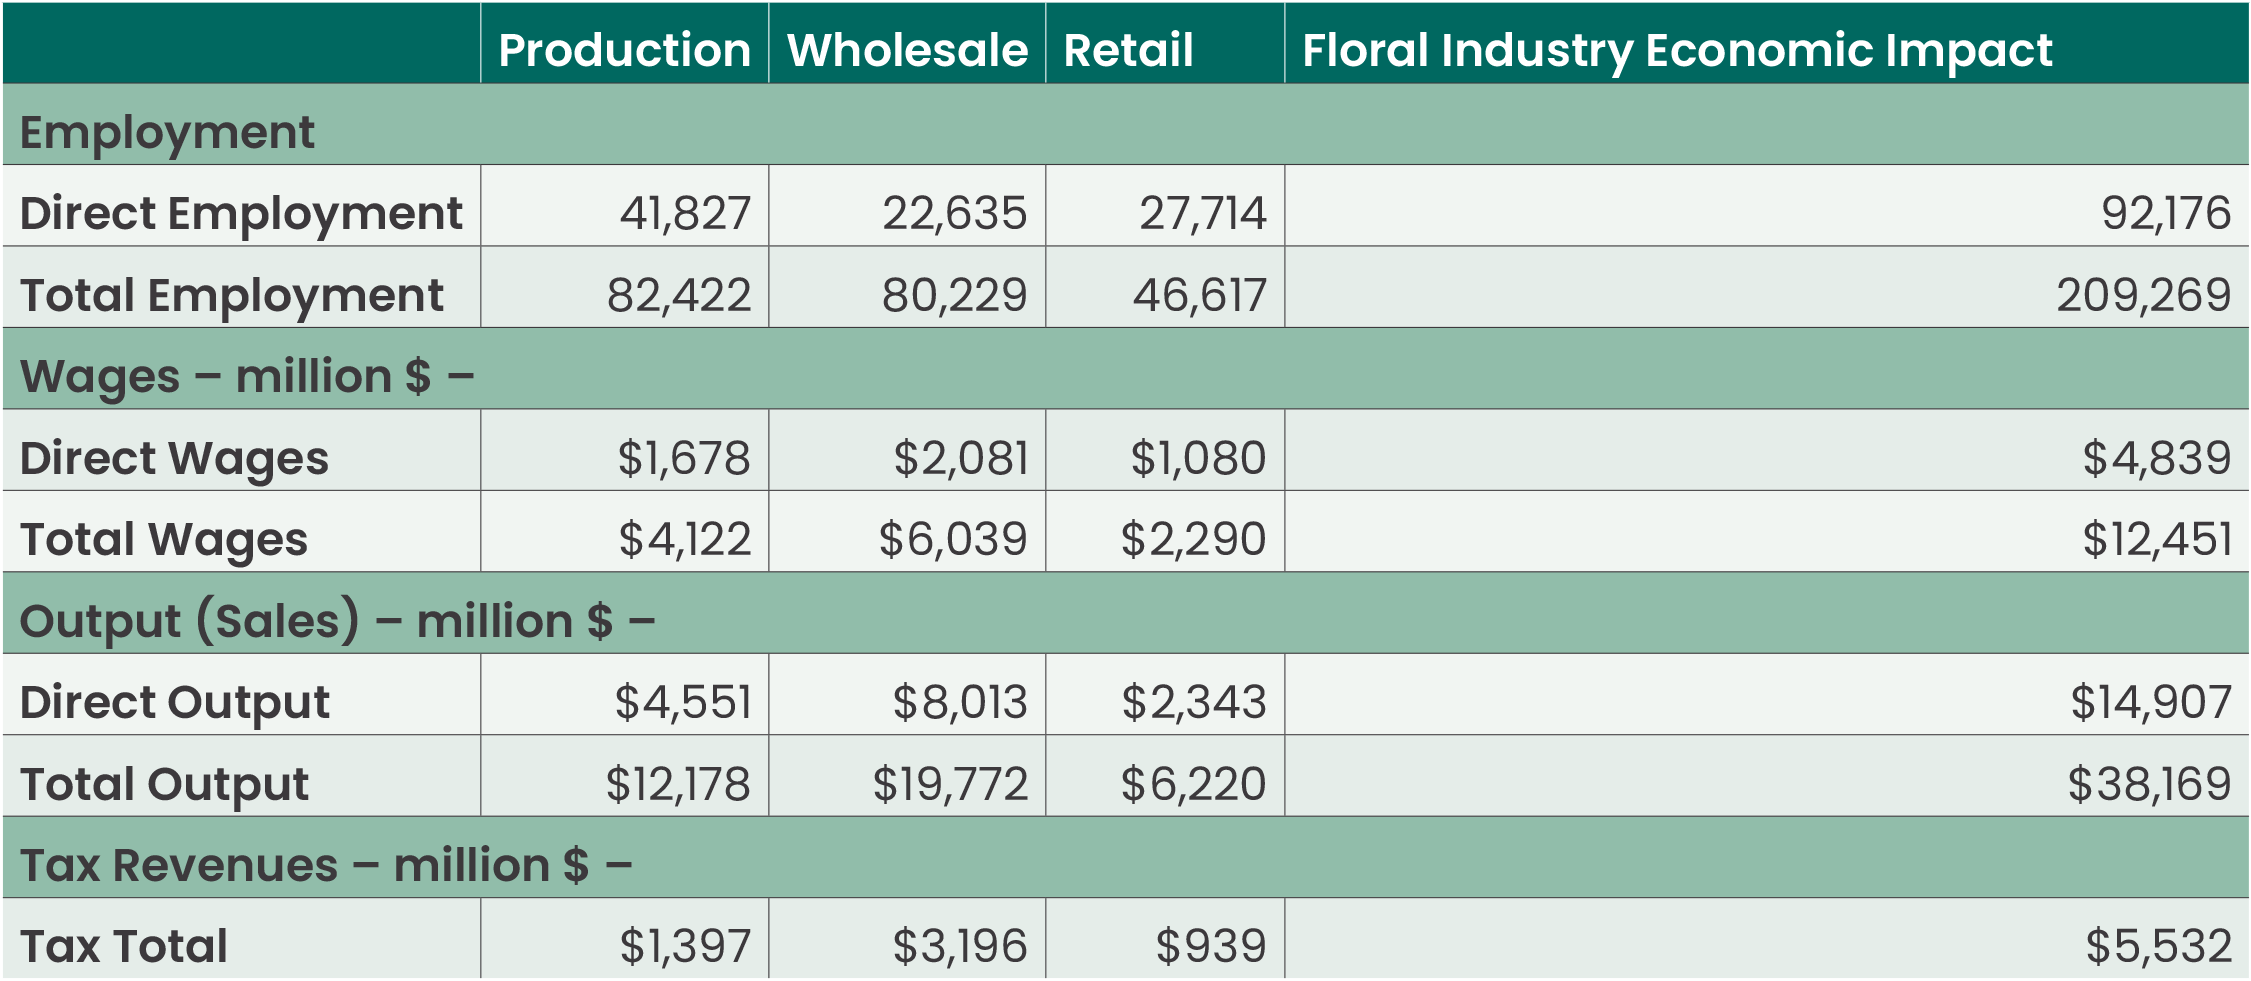 Floral economic impact by business segment.png